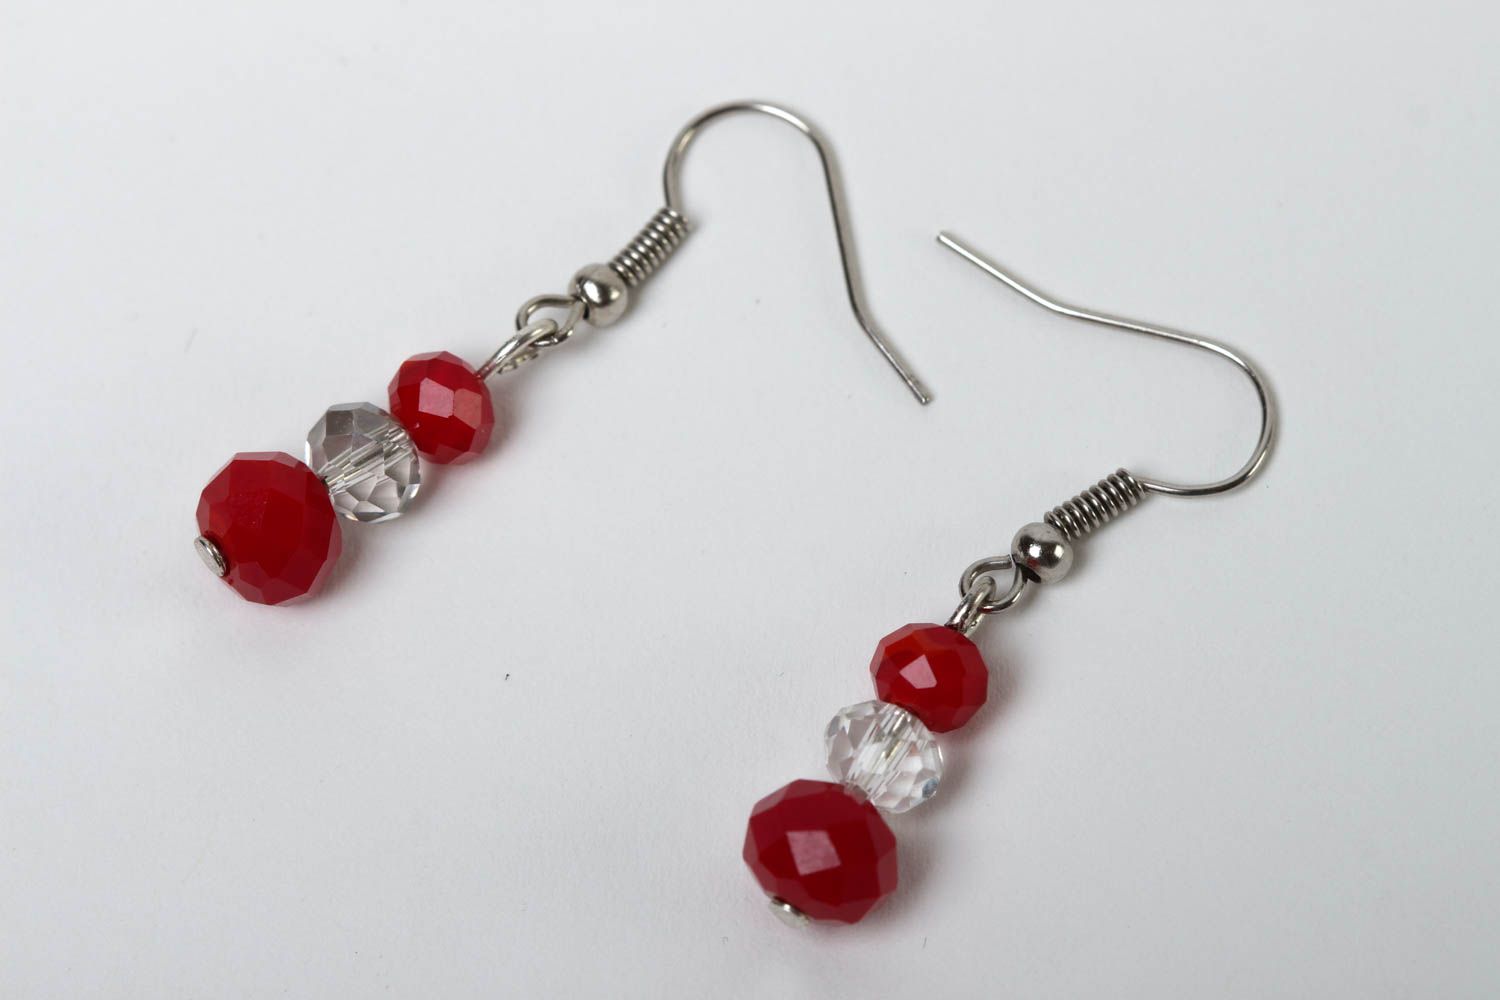 Handmade earrings with crystal beads earrings with charms designer jewelry photo 2